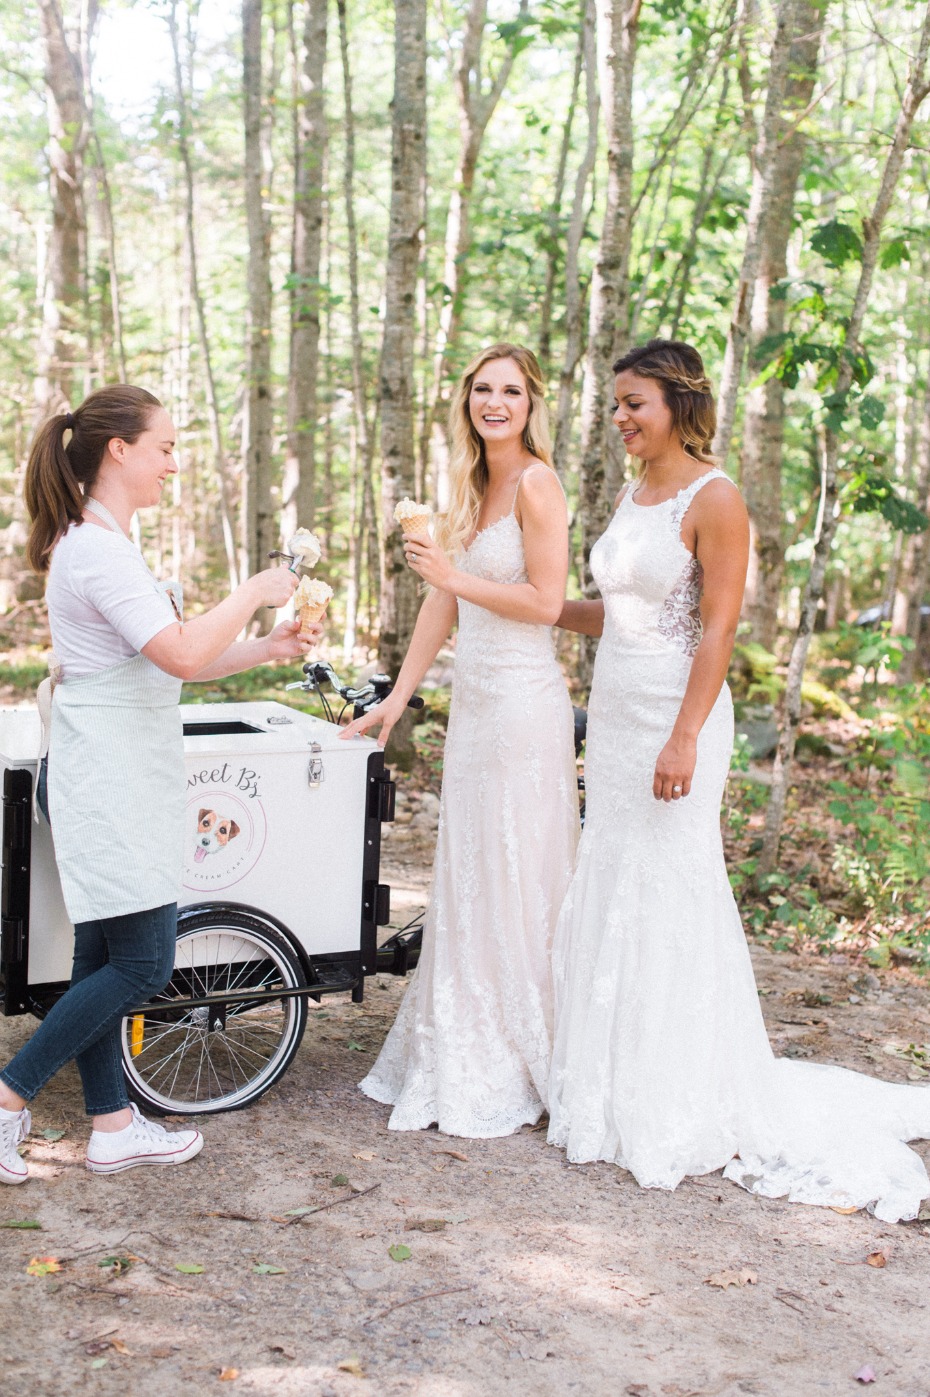 Have an ice cream stand at your wedding